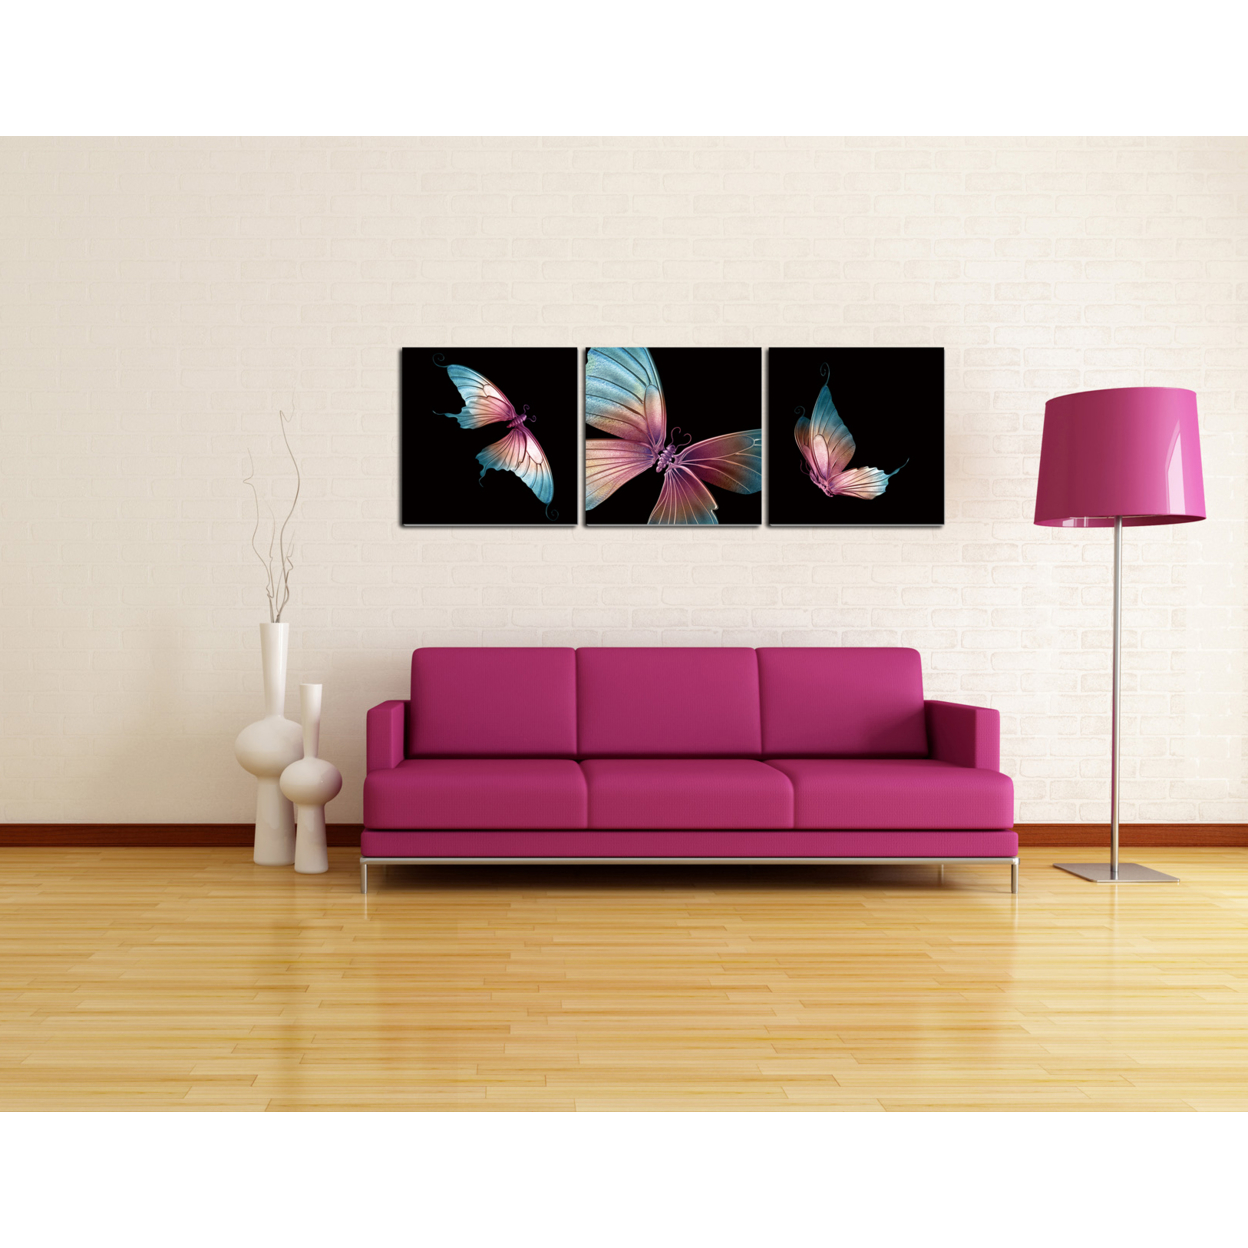 Butterfly 3 Piece Wrapped Canvas Wall Art Print 27.5x82 Inches